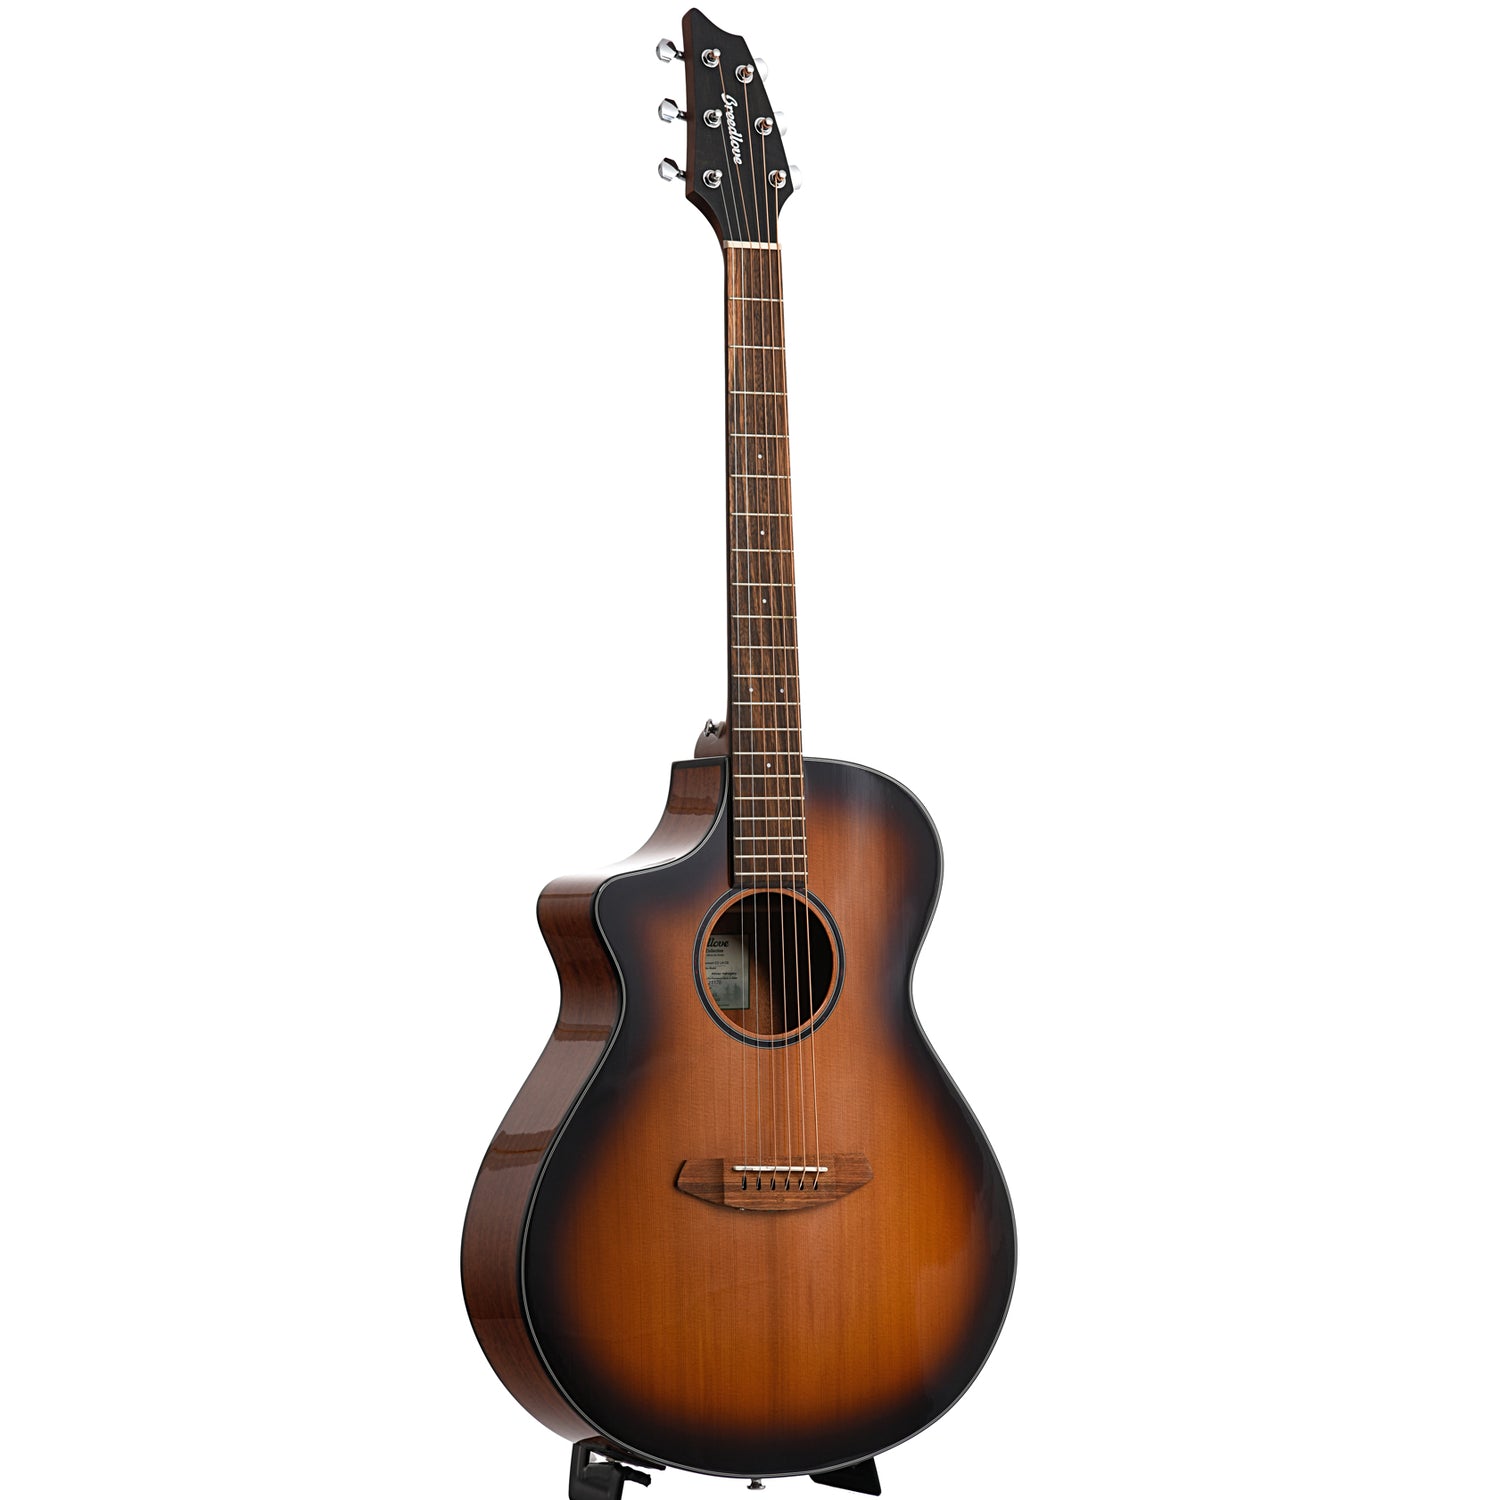 Image 4 of Breedlove Discovery S Concert Edgeburst Left-handed CE Red Cedar-African Mahogany Acoustic-Electric Guitar - SKU# DSCN44LCERCAM : Product Type Flat-top Guitars : Elderly Instruments